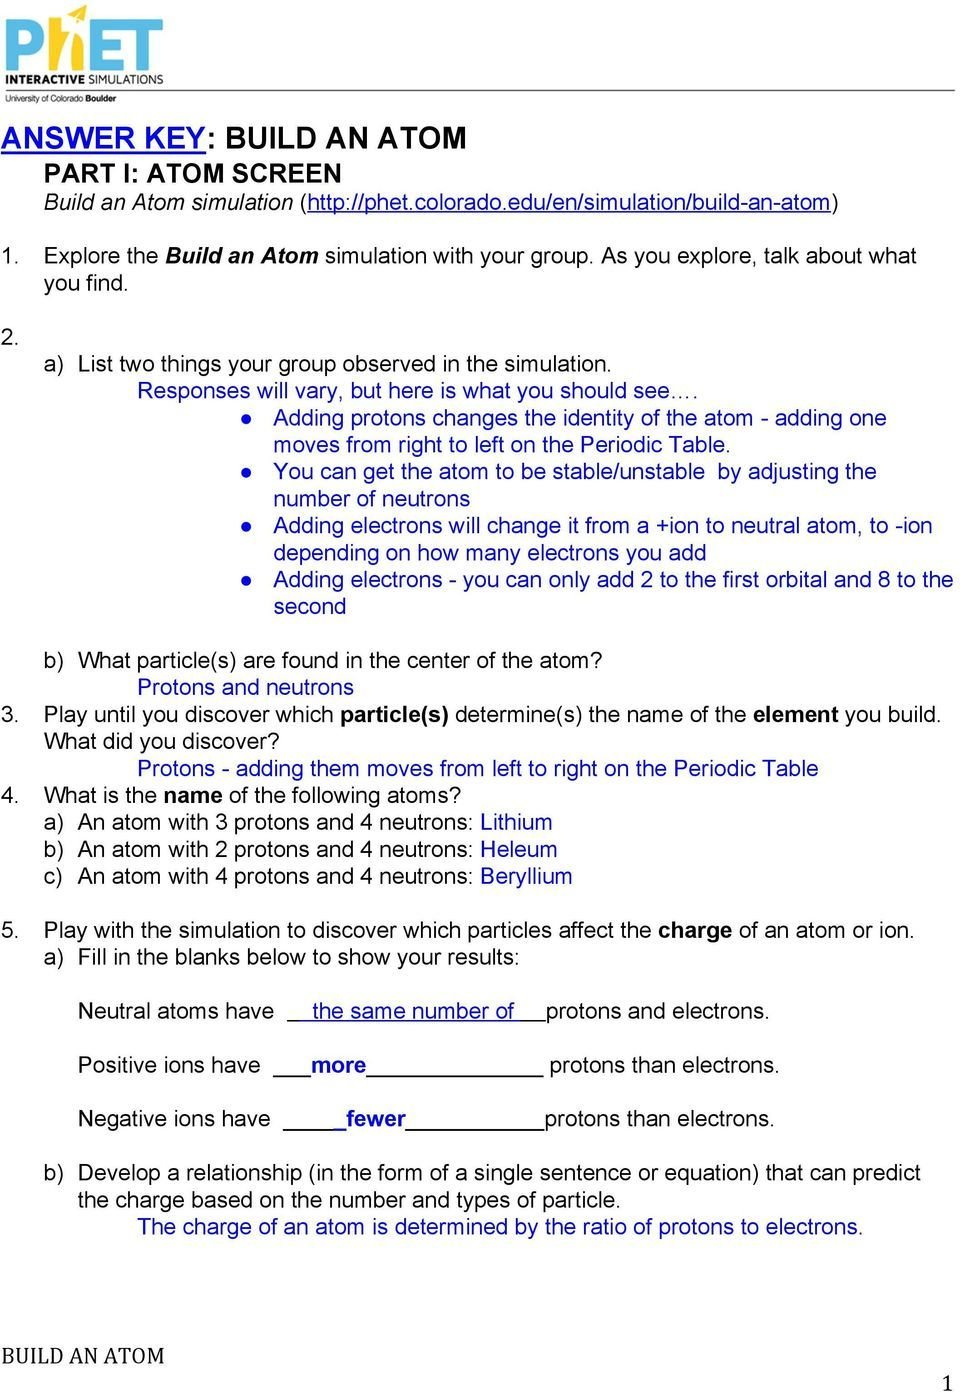 Phet Isotopes And Atomic Mass Worksheet Answers  Briefencounters Intended For Isotopes And Atomic Mass Worksheet Answers